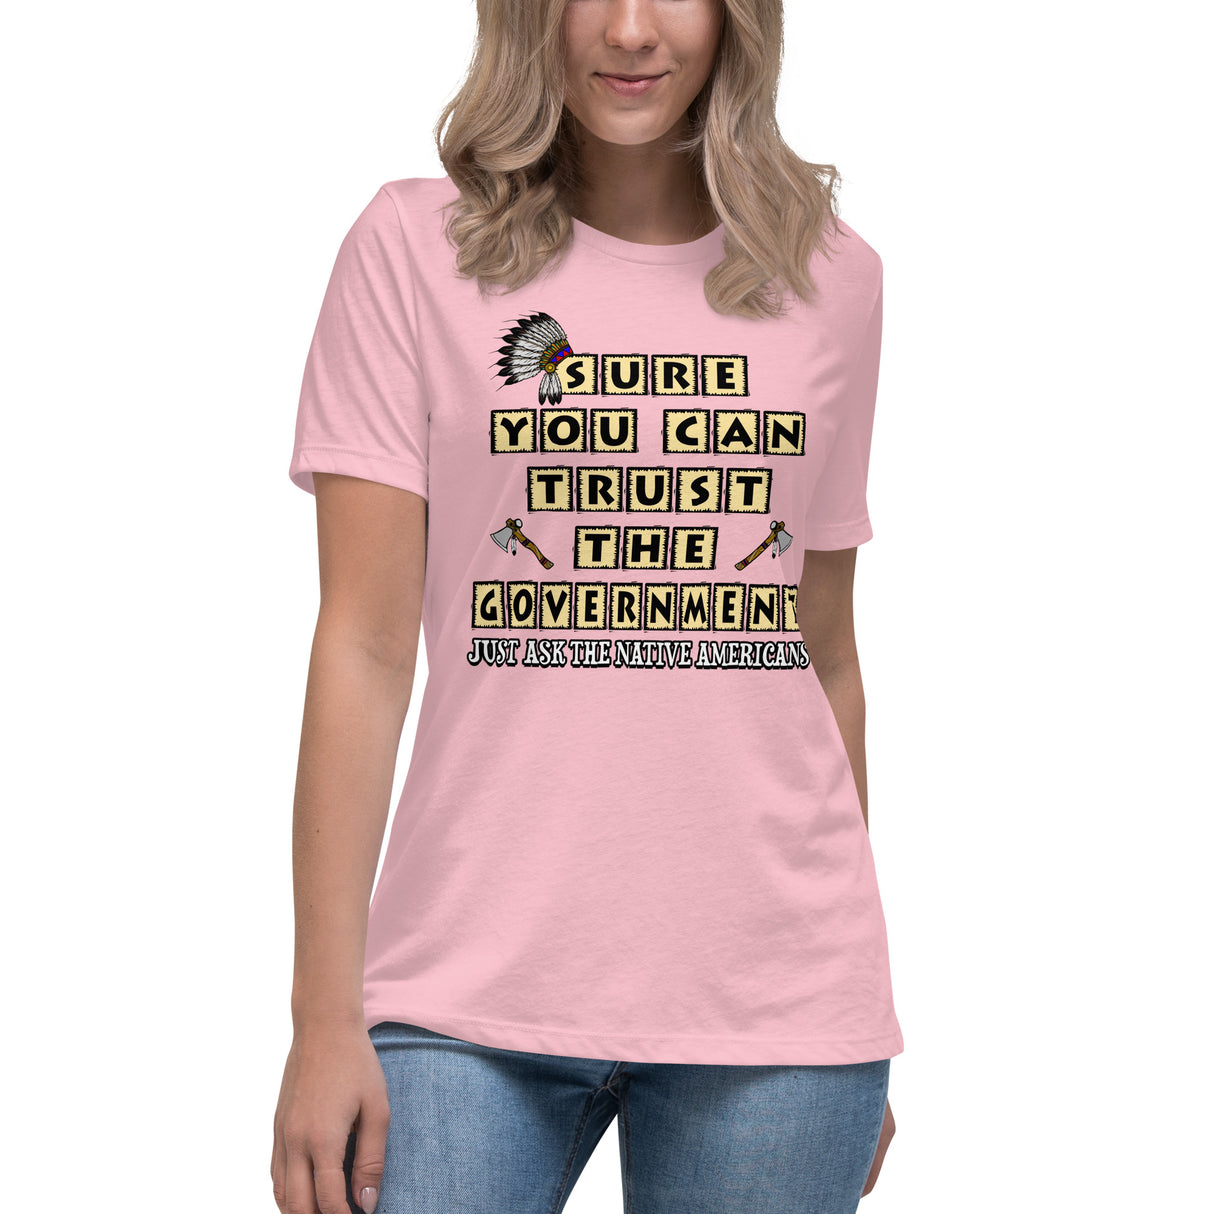 Sure You Can Trust The Government Women's Shirt - Libertarian Country